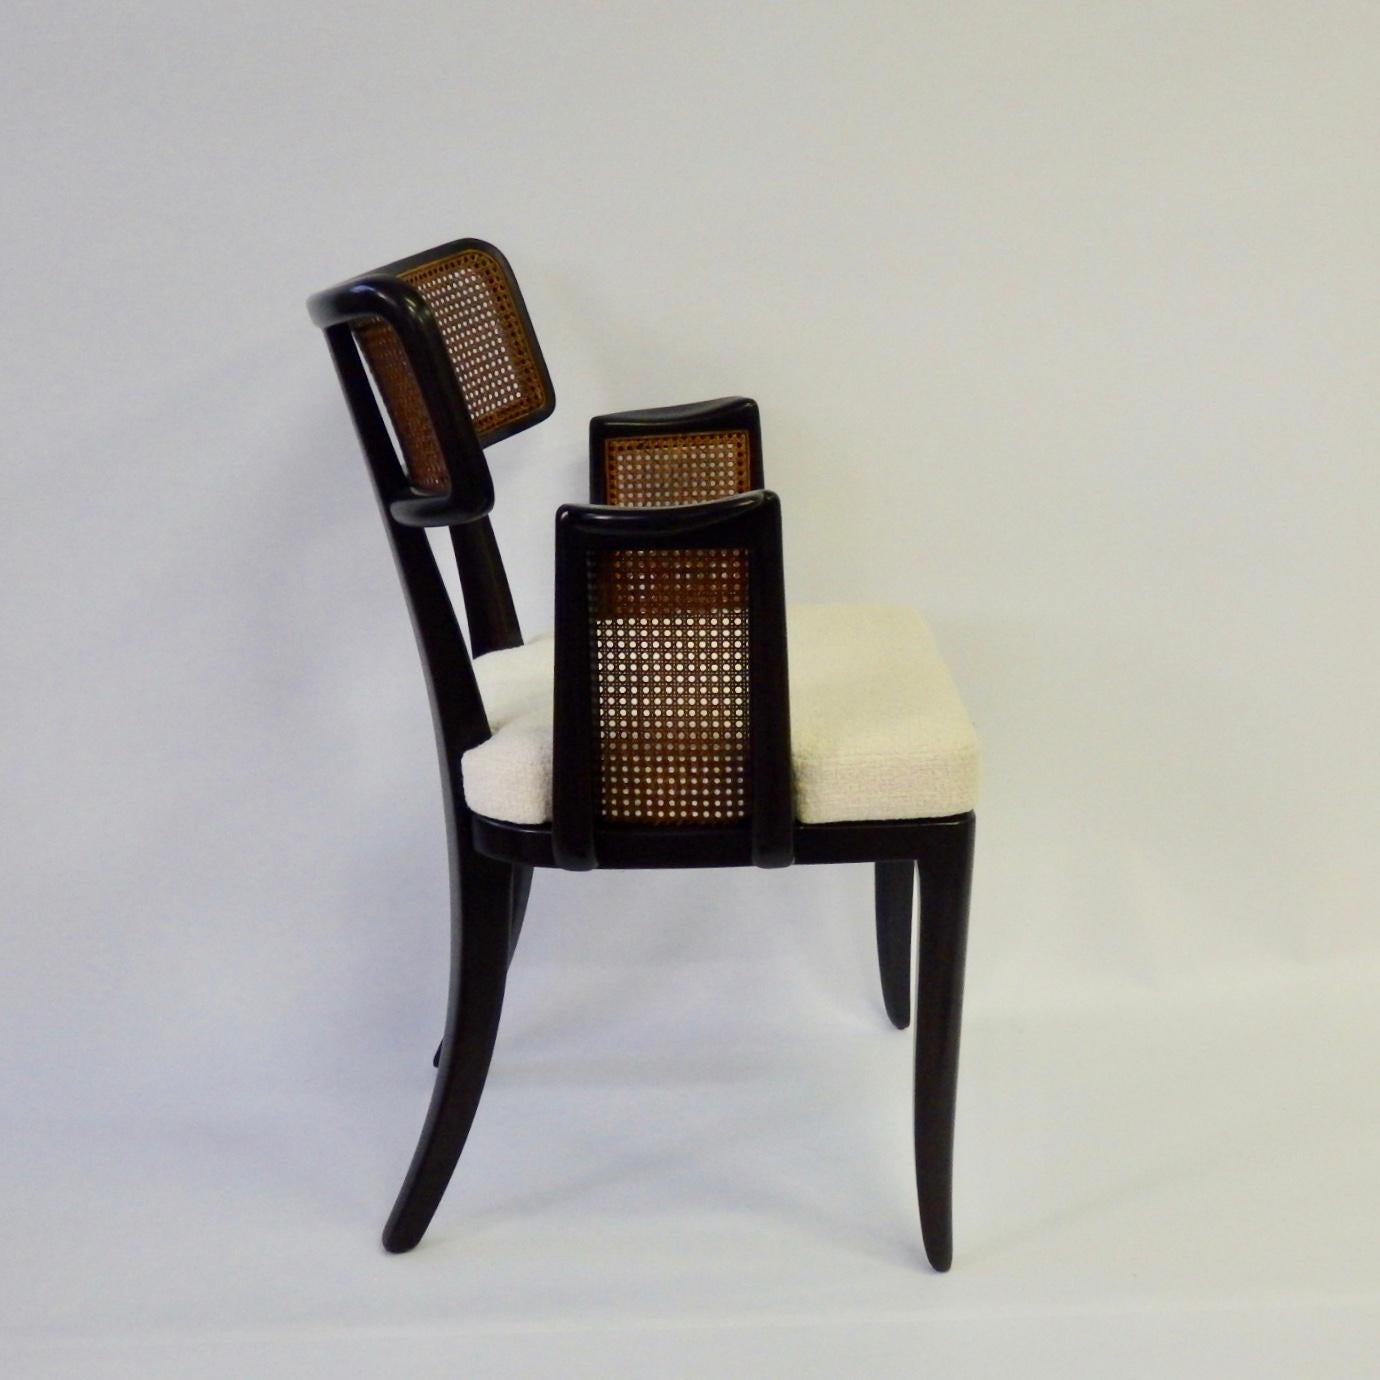 20th Century Rare Pair of Edward Wormley for Dunbar Caneback Side Chairs